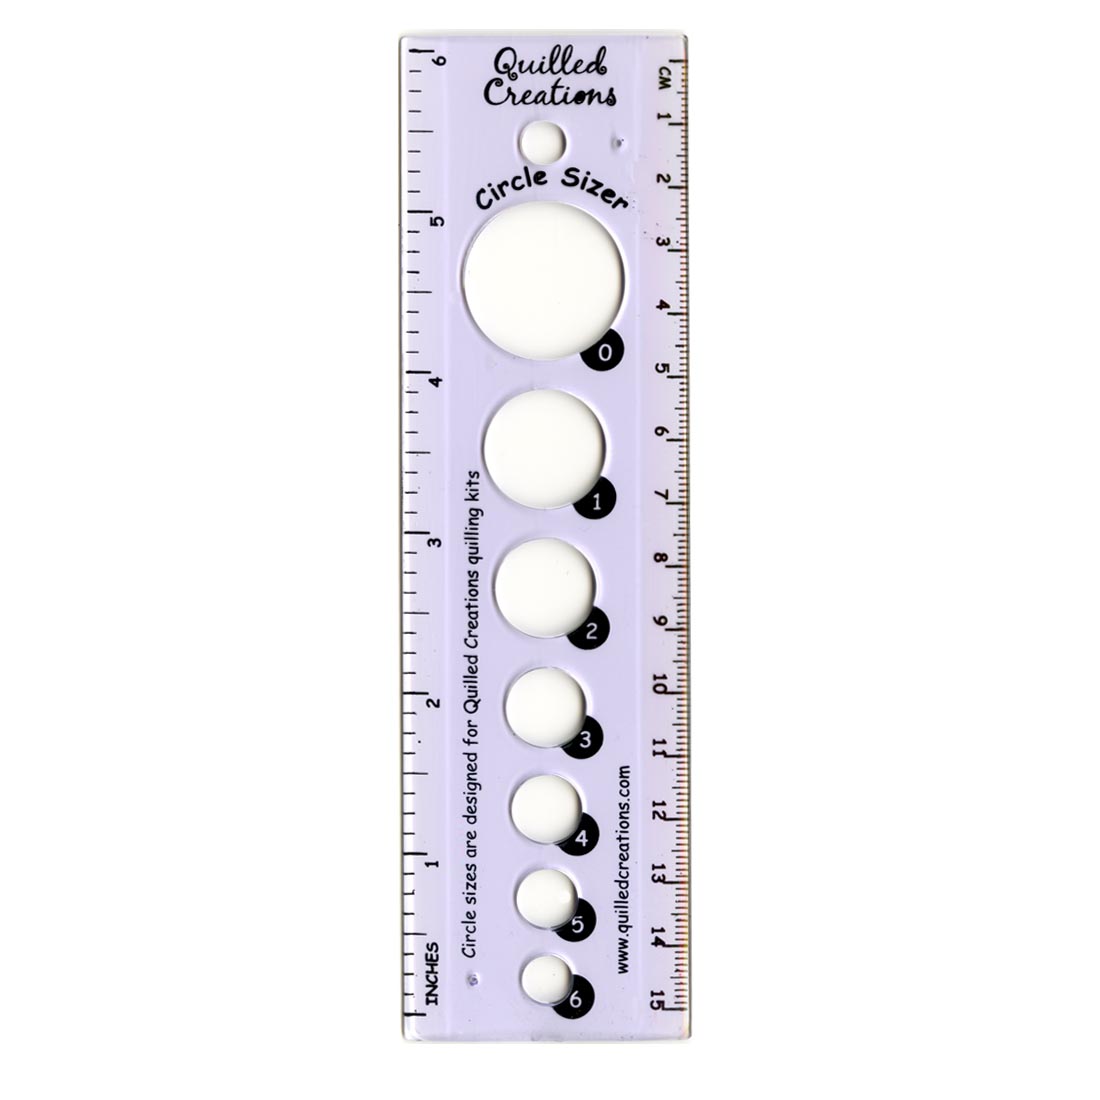 Quilling Circle Sizer Ruler by Quilled Creations